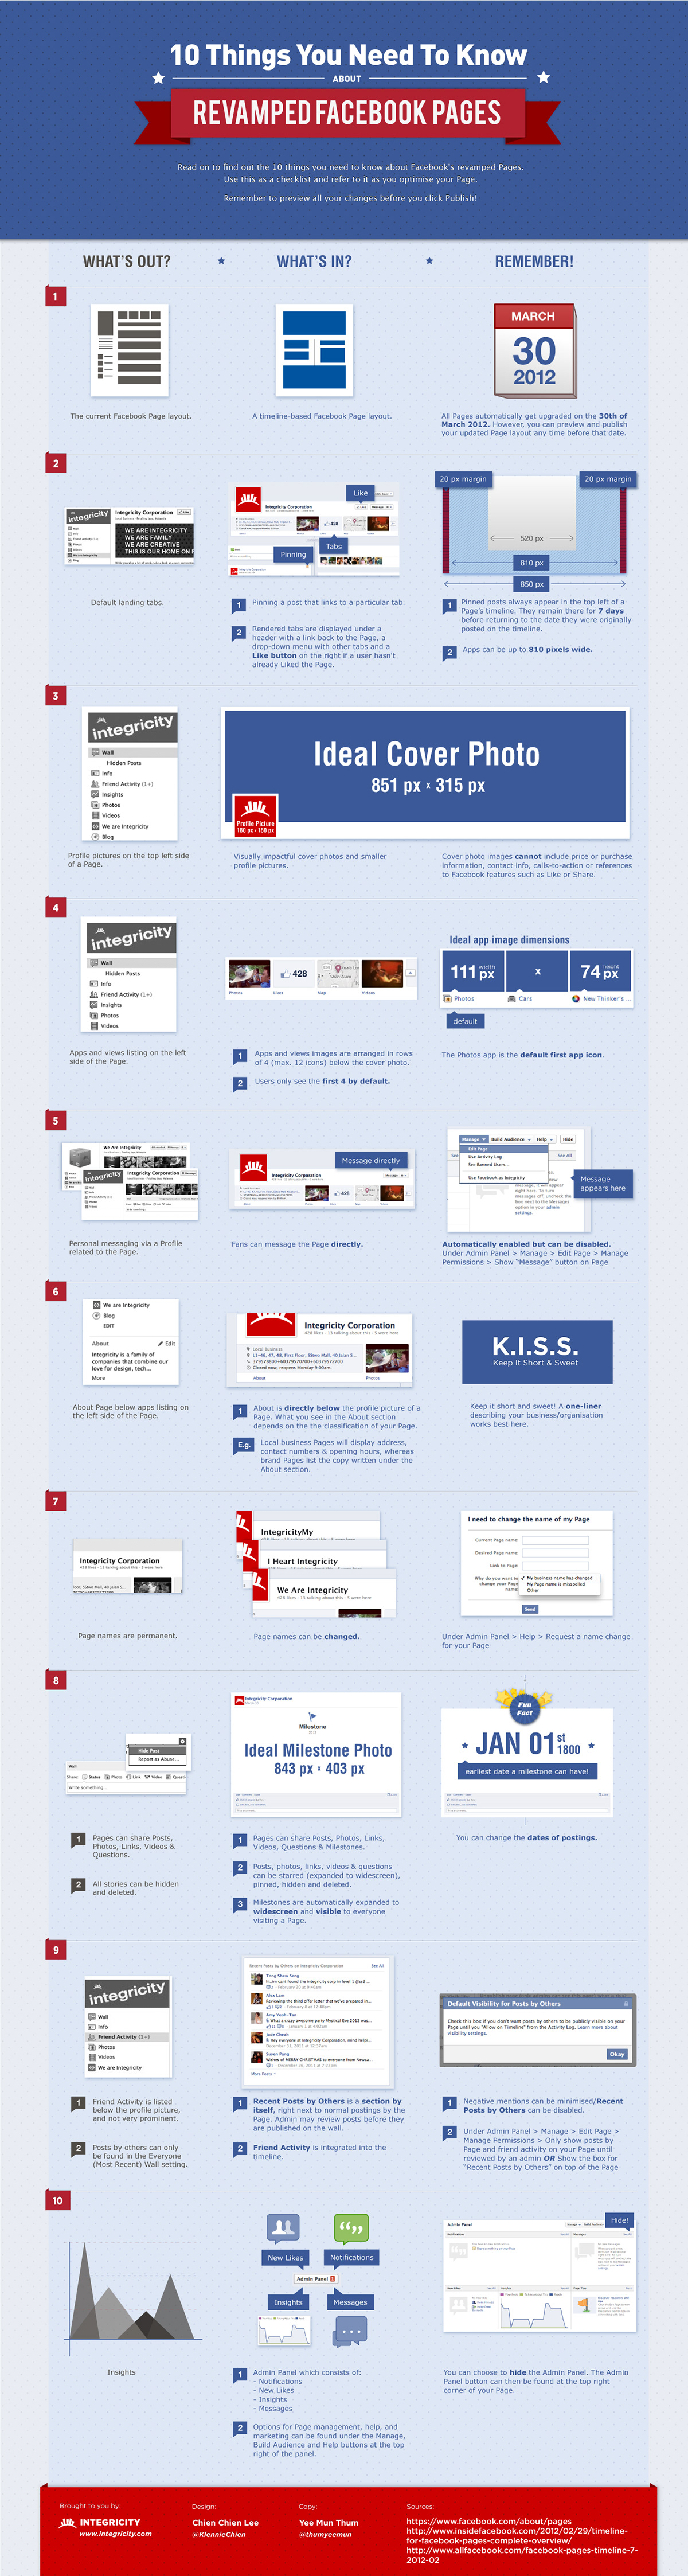 infographic  pages integricity timeline pattern 10 things facebook pages  branding Viral pages